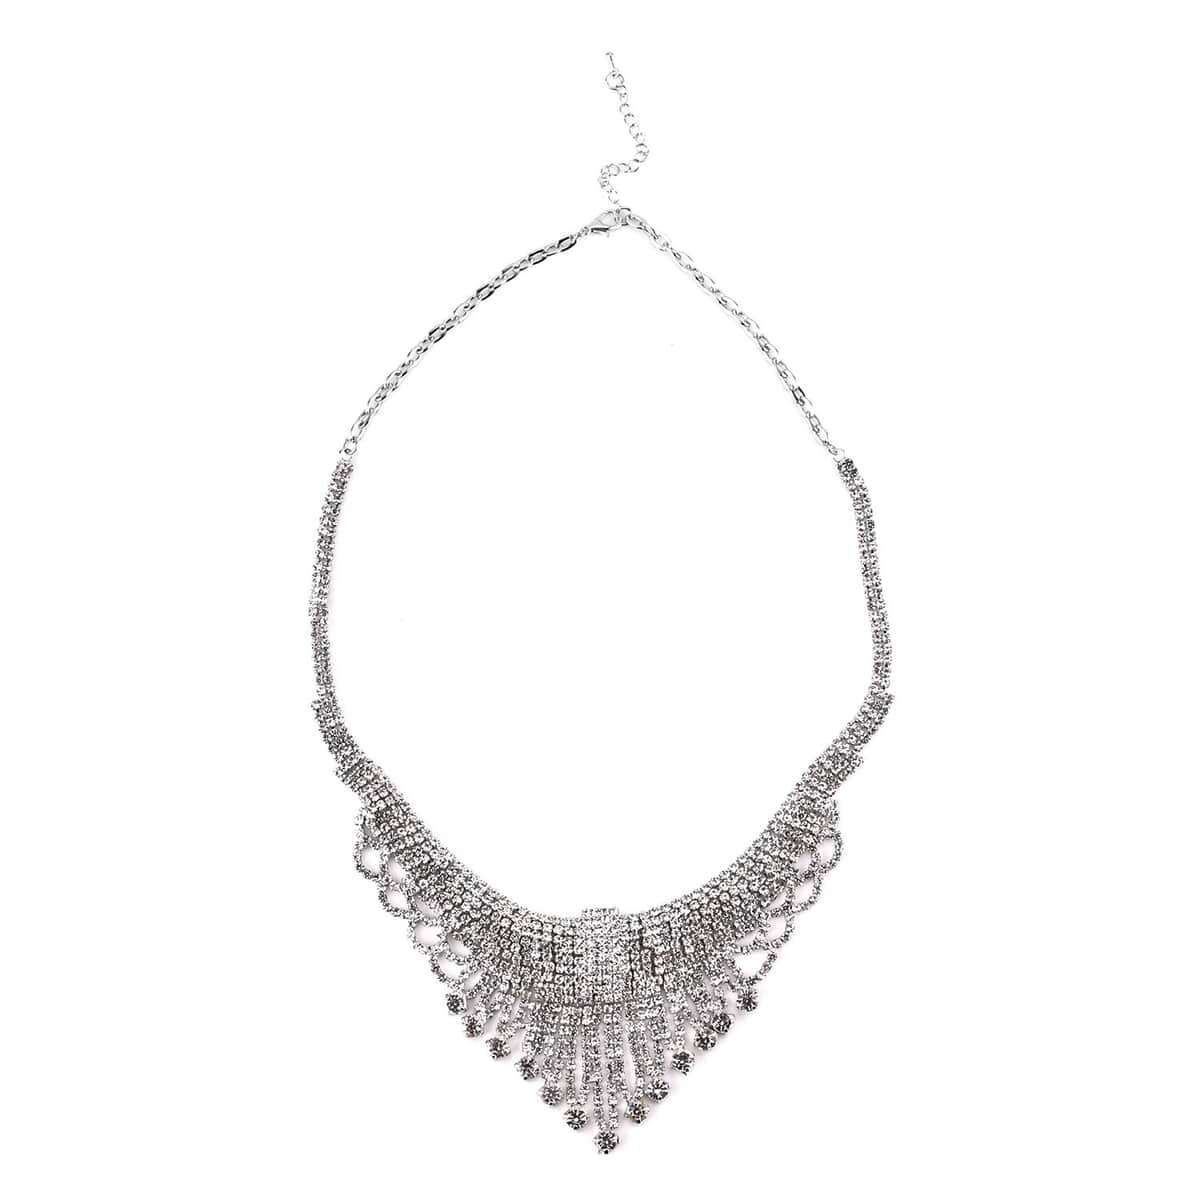 Buy Austrian Crystal Necklace 20-22 Inches and Earrings in Silvertone ...